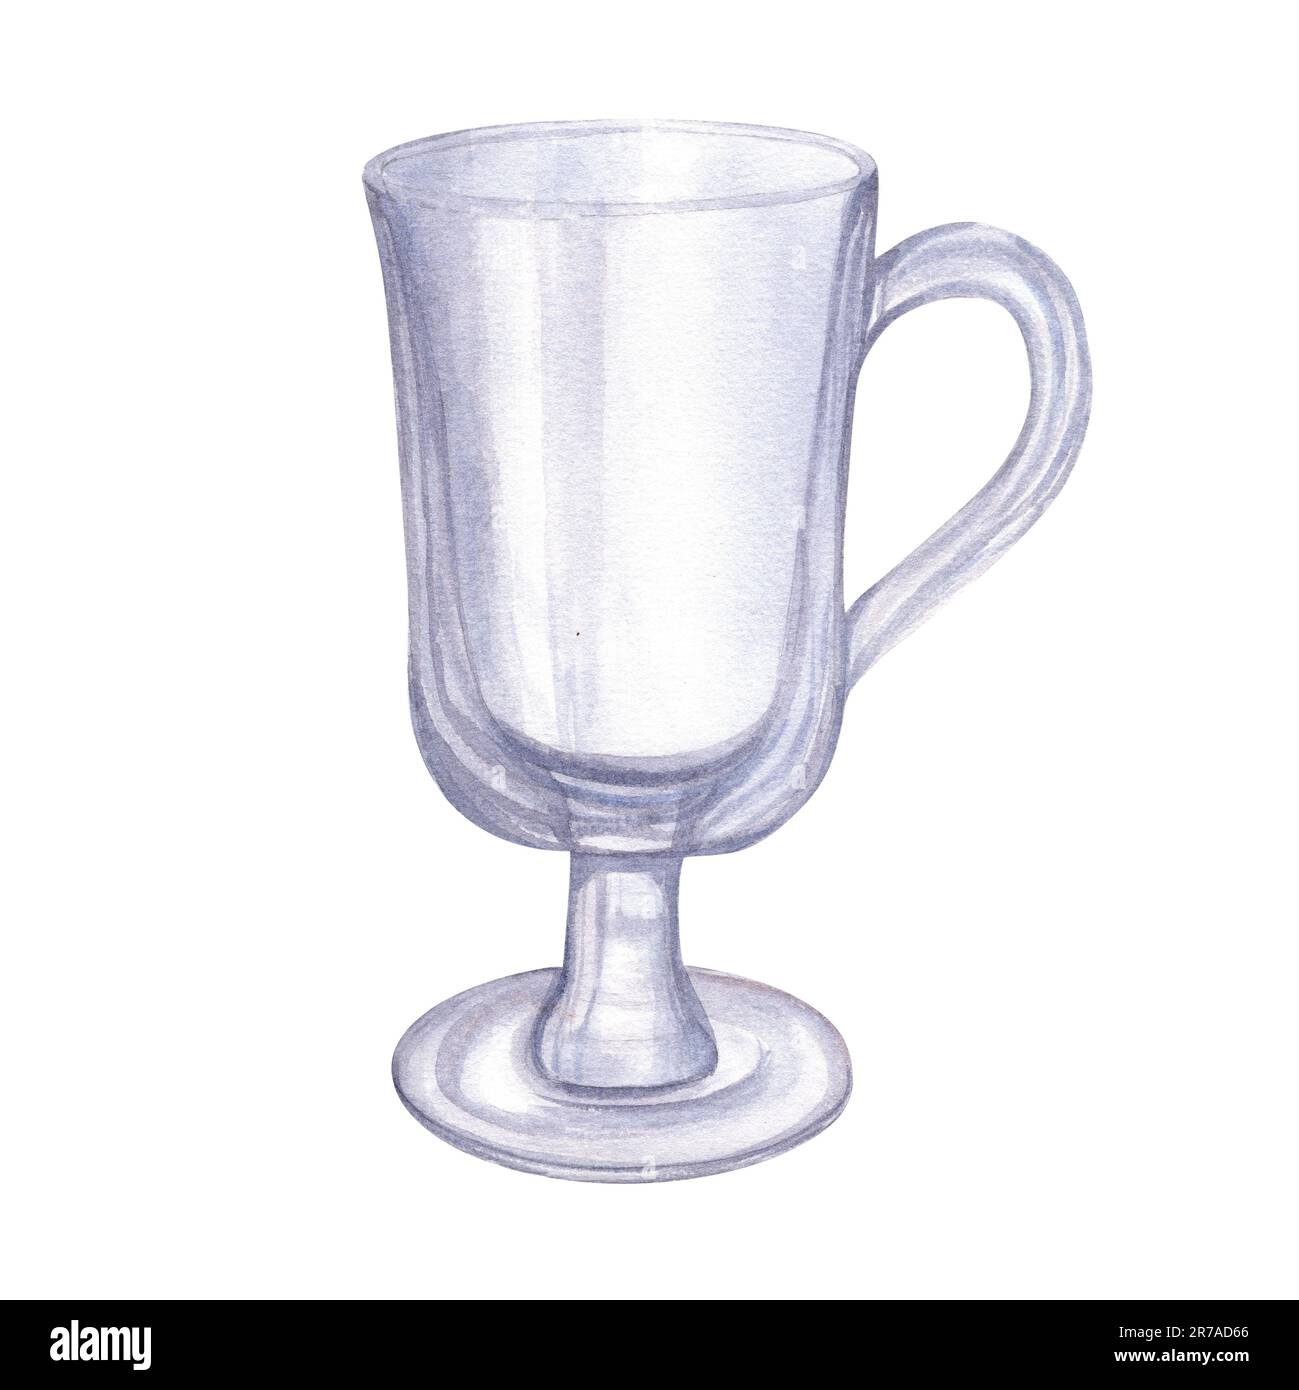 https://c8.alamy.com/comp/2R7AD66/empty-glass-for-drink-isolated-on-white-background-watercolor-hand-drawn-illustration-of-transparent-glassware-for-mulled-wine-hand-drawn-set-2R7AD66.jpg